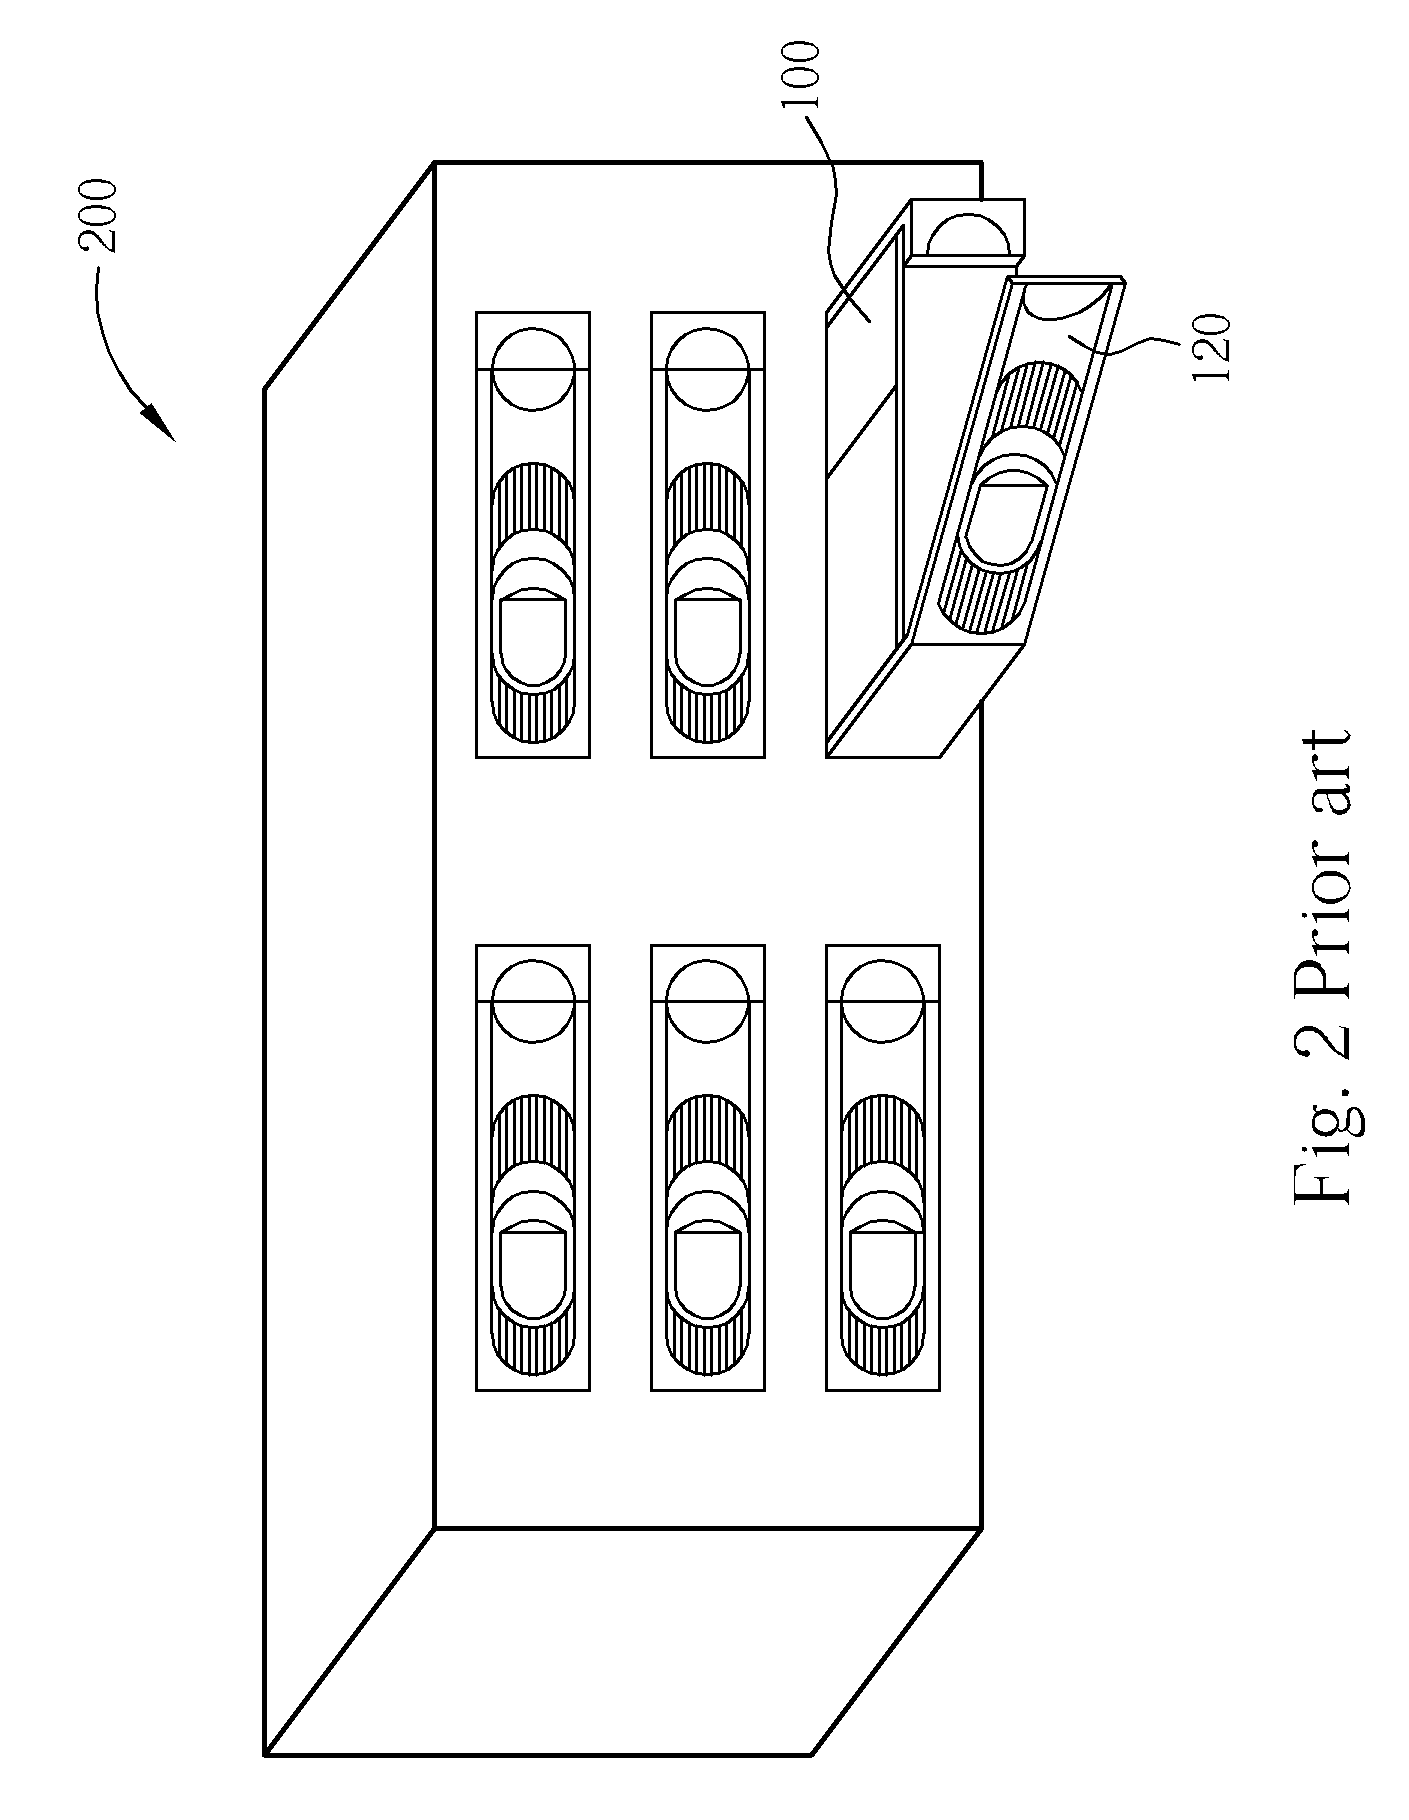 Removable hard disc loading device